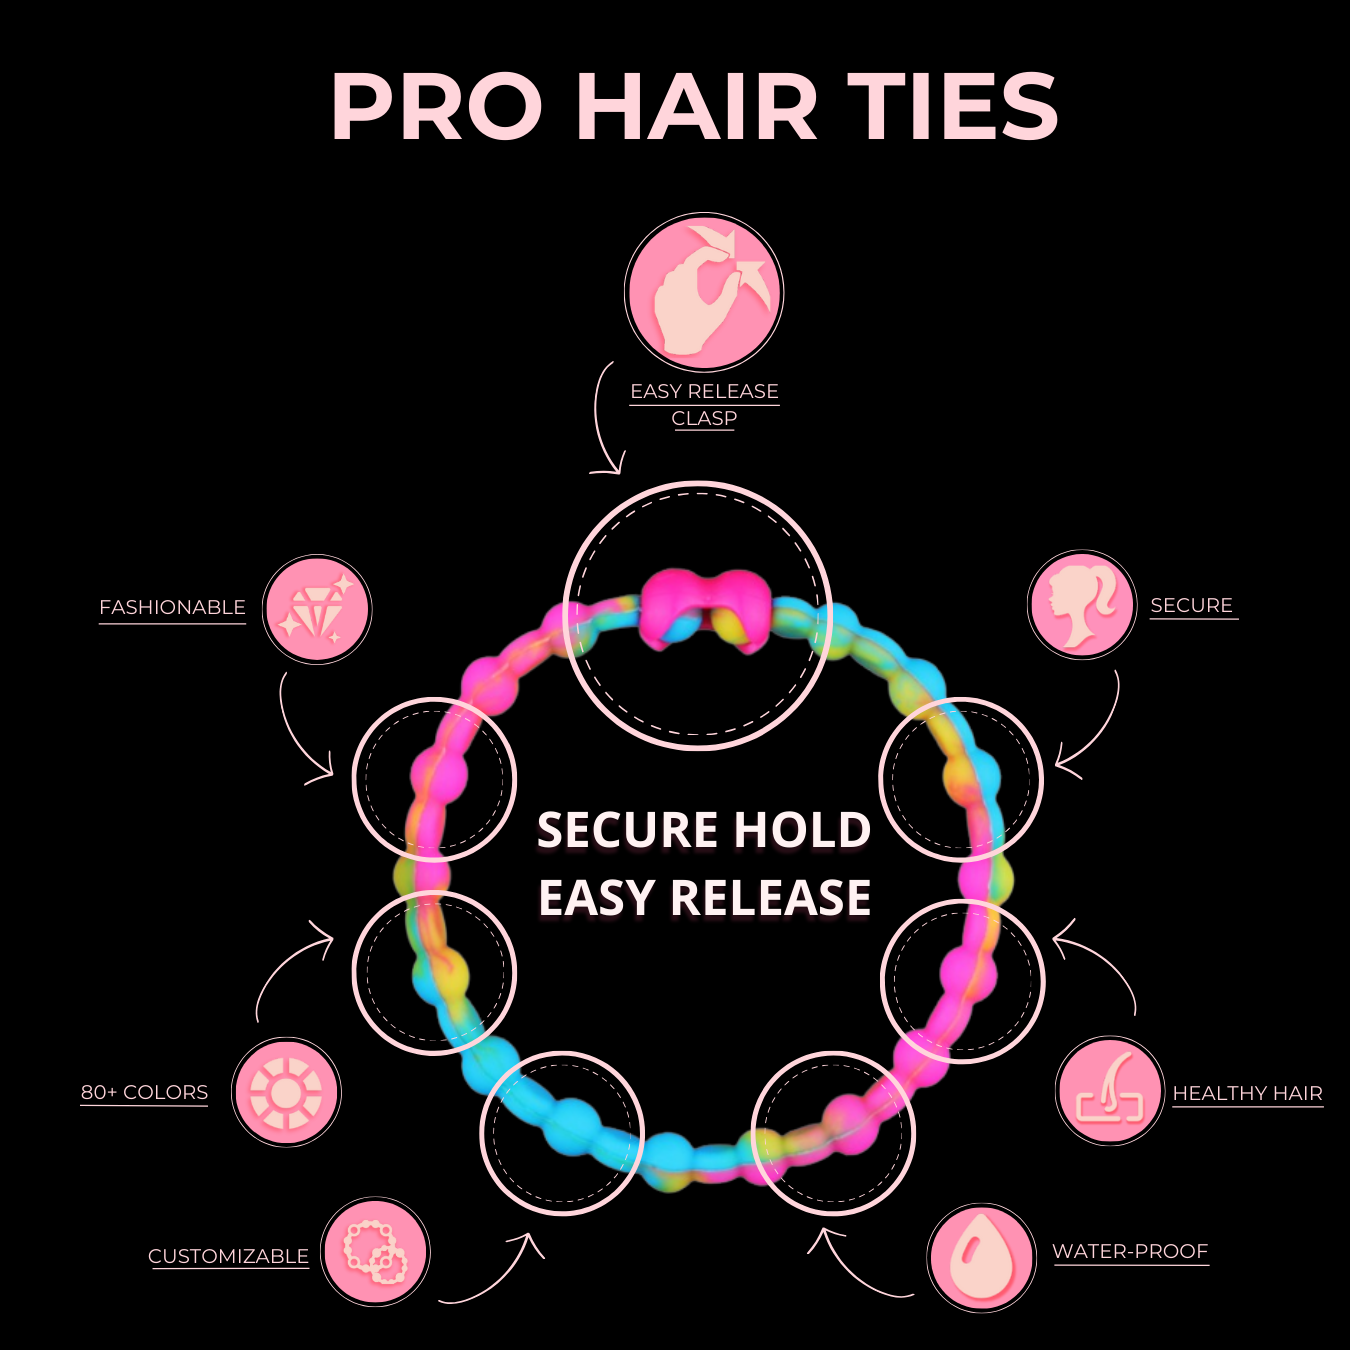 Azure Dream Pack PRO Hair Ties: Easy Release Adjustable for Every Hair Type PACK OF 4